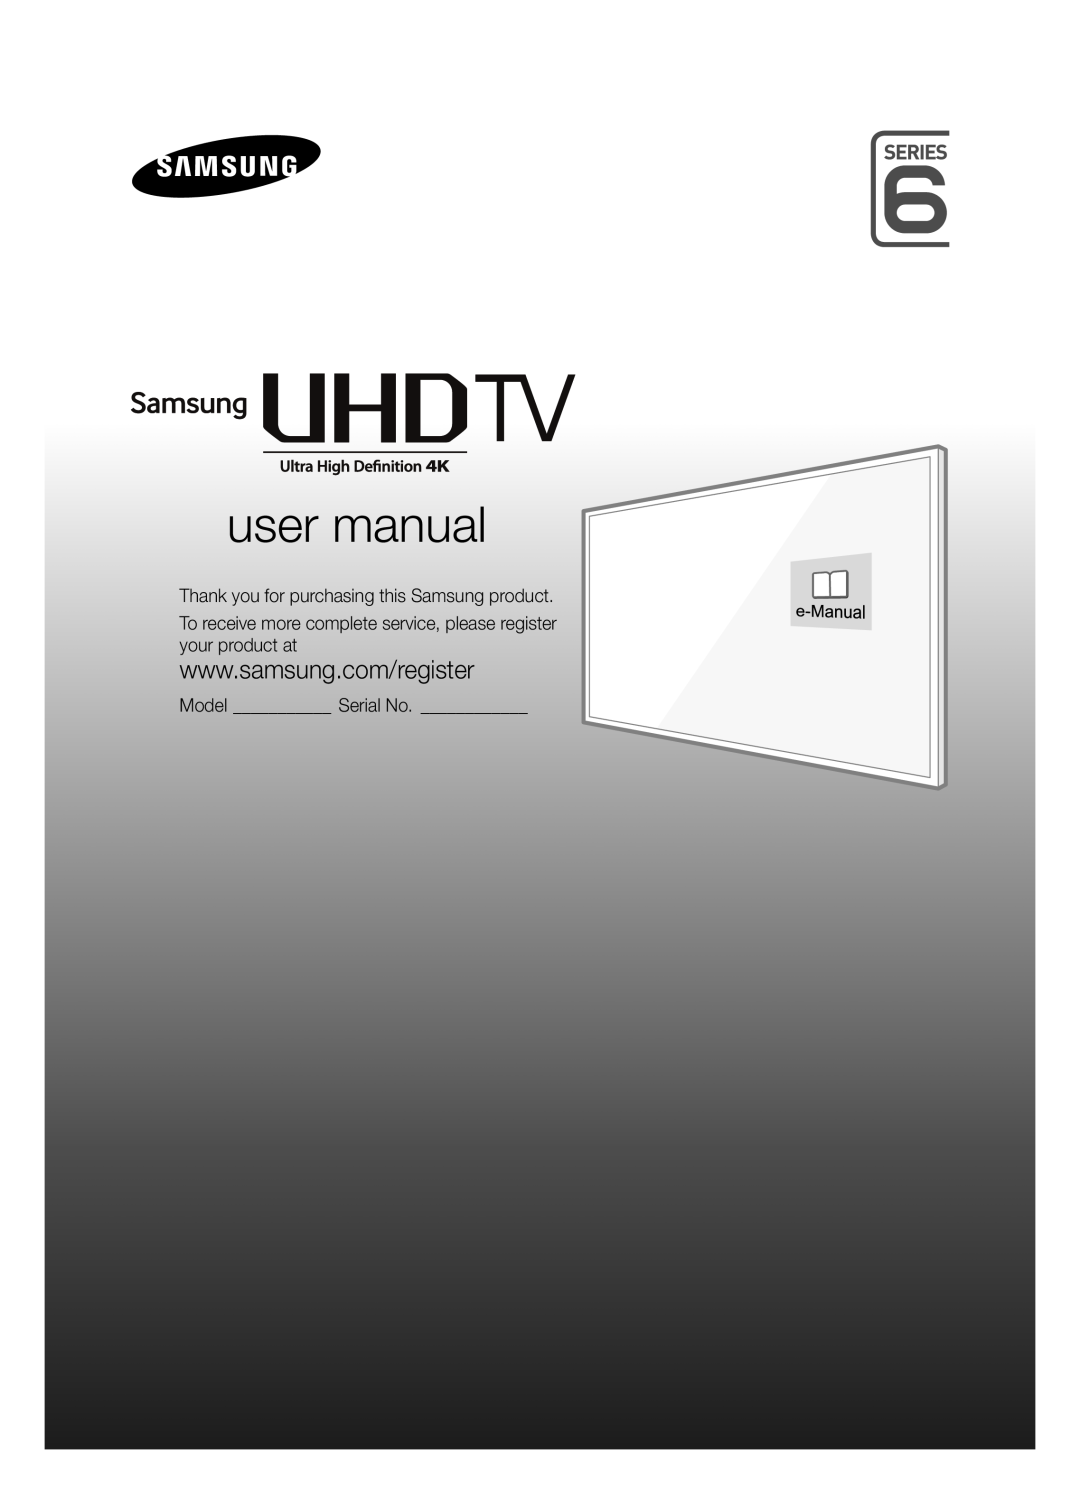 Samsung UE40JU6410UXXC, UE48JU6440WXXH manual user manual, Thank you for purchasing this Samsung product, Model Serial No 